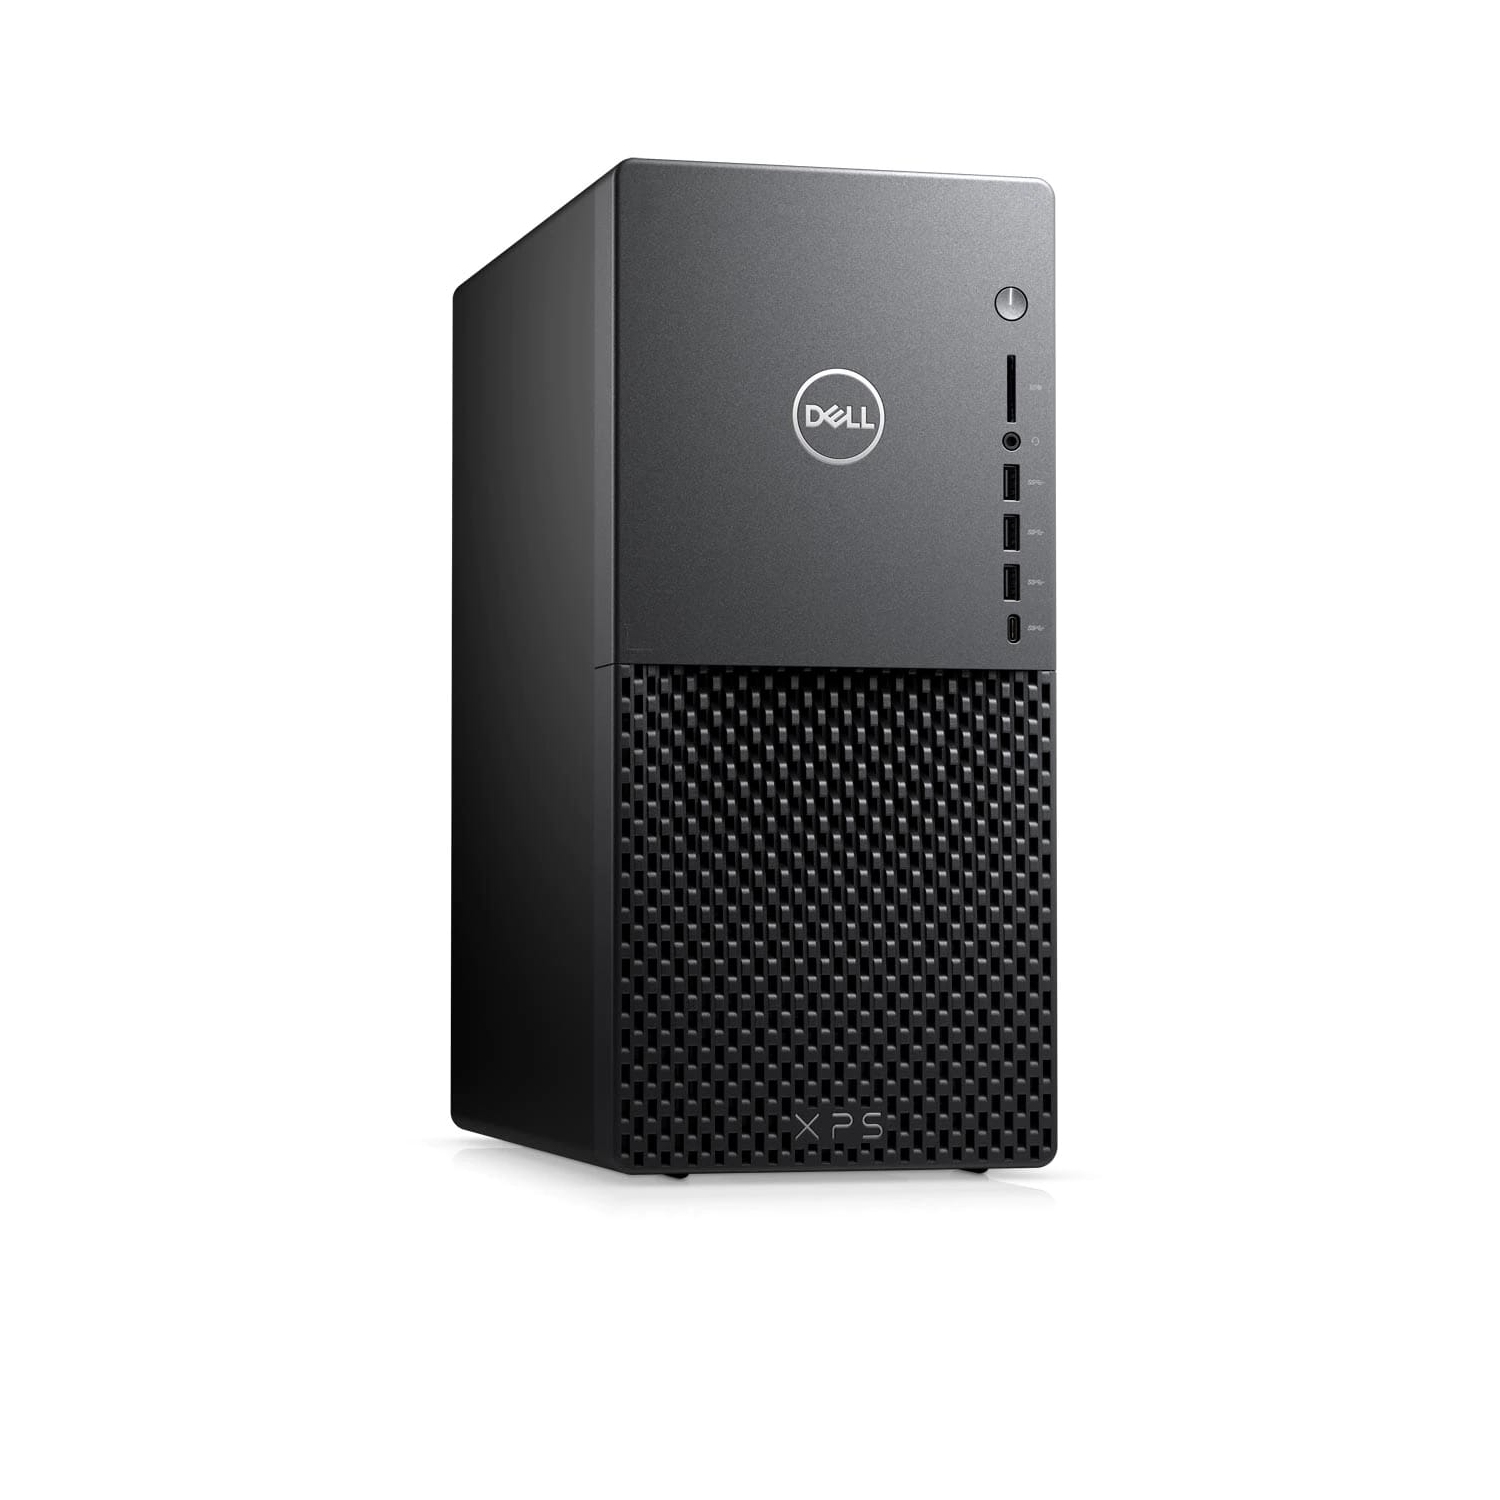 Refurbished (Excellent) - Dell XPS 8940 Desktop (2020) | Core i9 - 2TB SSD + 2TB HDD - 64GB RAM - 3060 Ti | 8 Cores @ 5.3 GHz - 11th Gen CPU Certified Refurbished